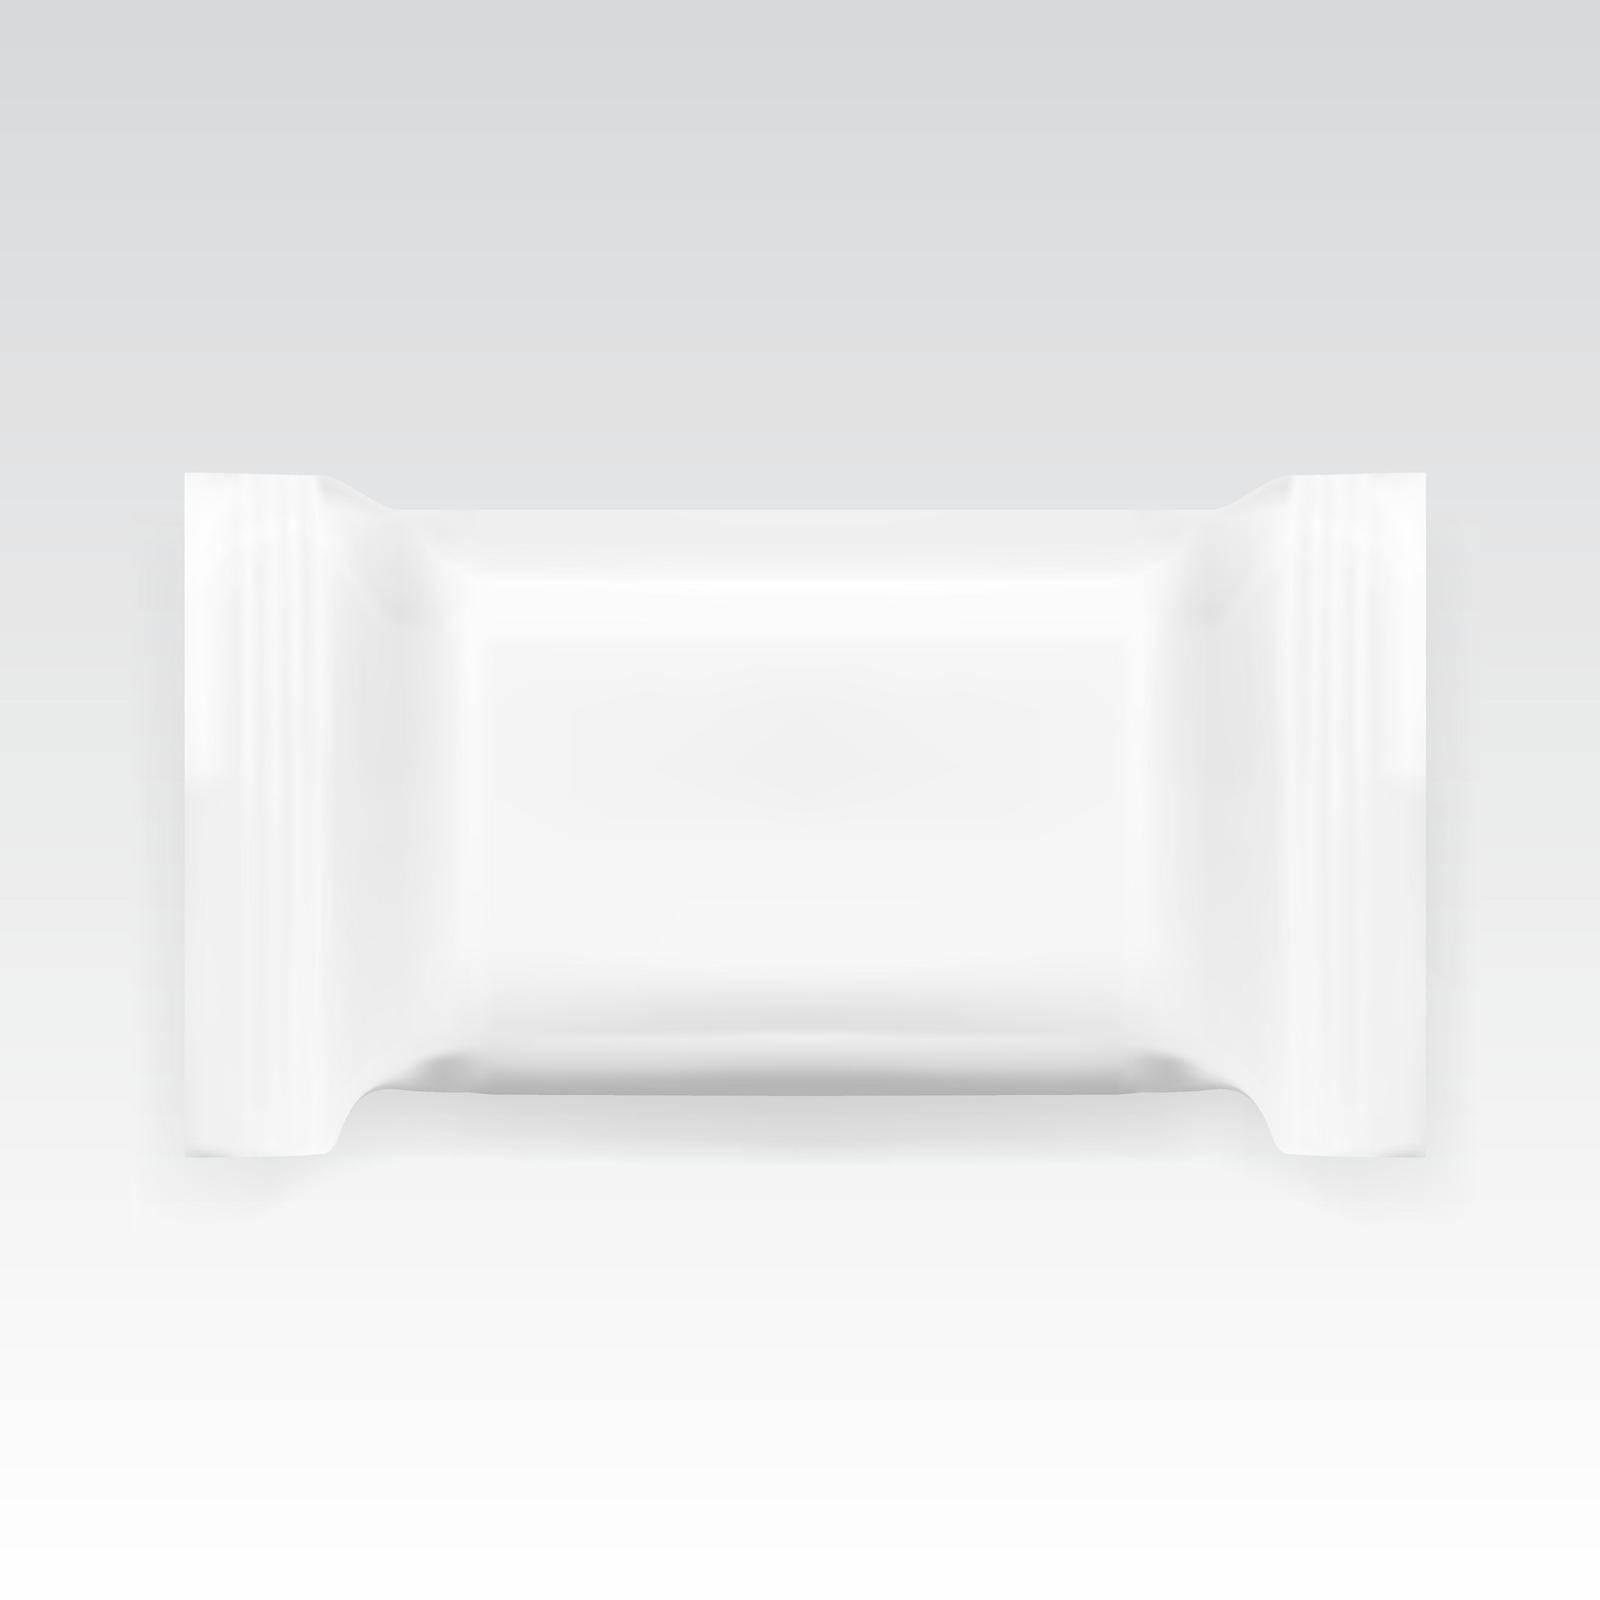 Realistic Packed White Disposable Soap by VectorThings